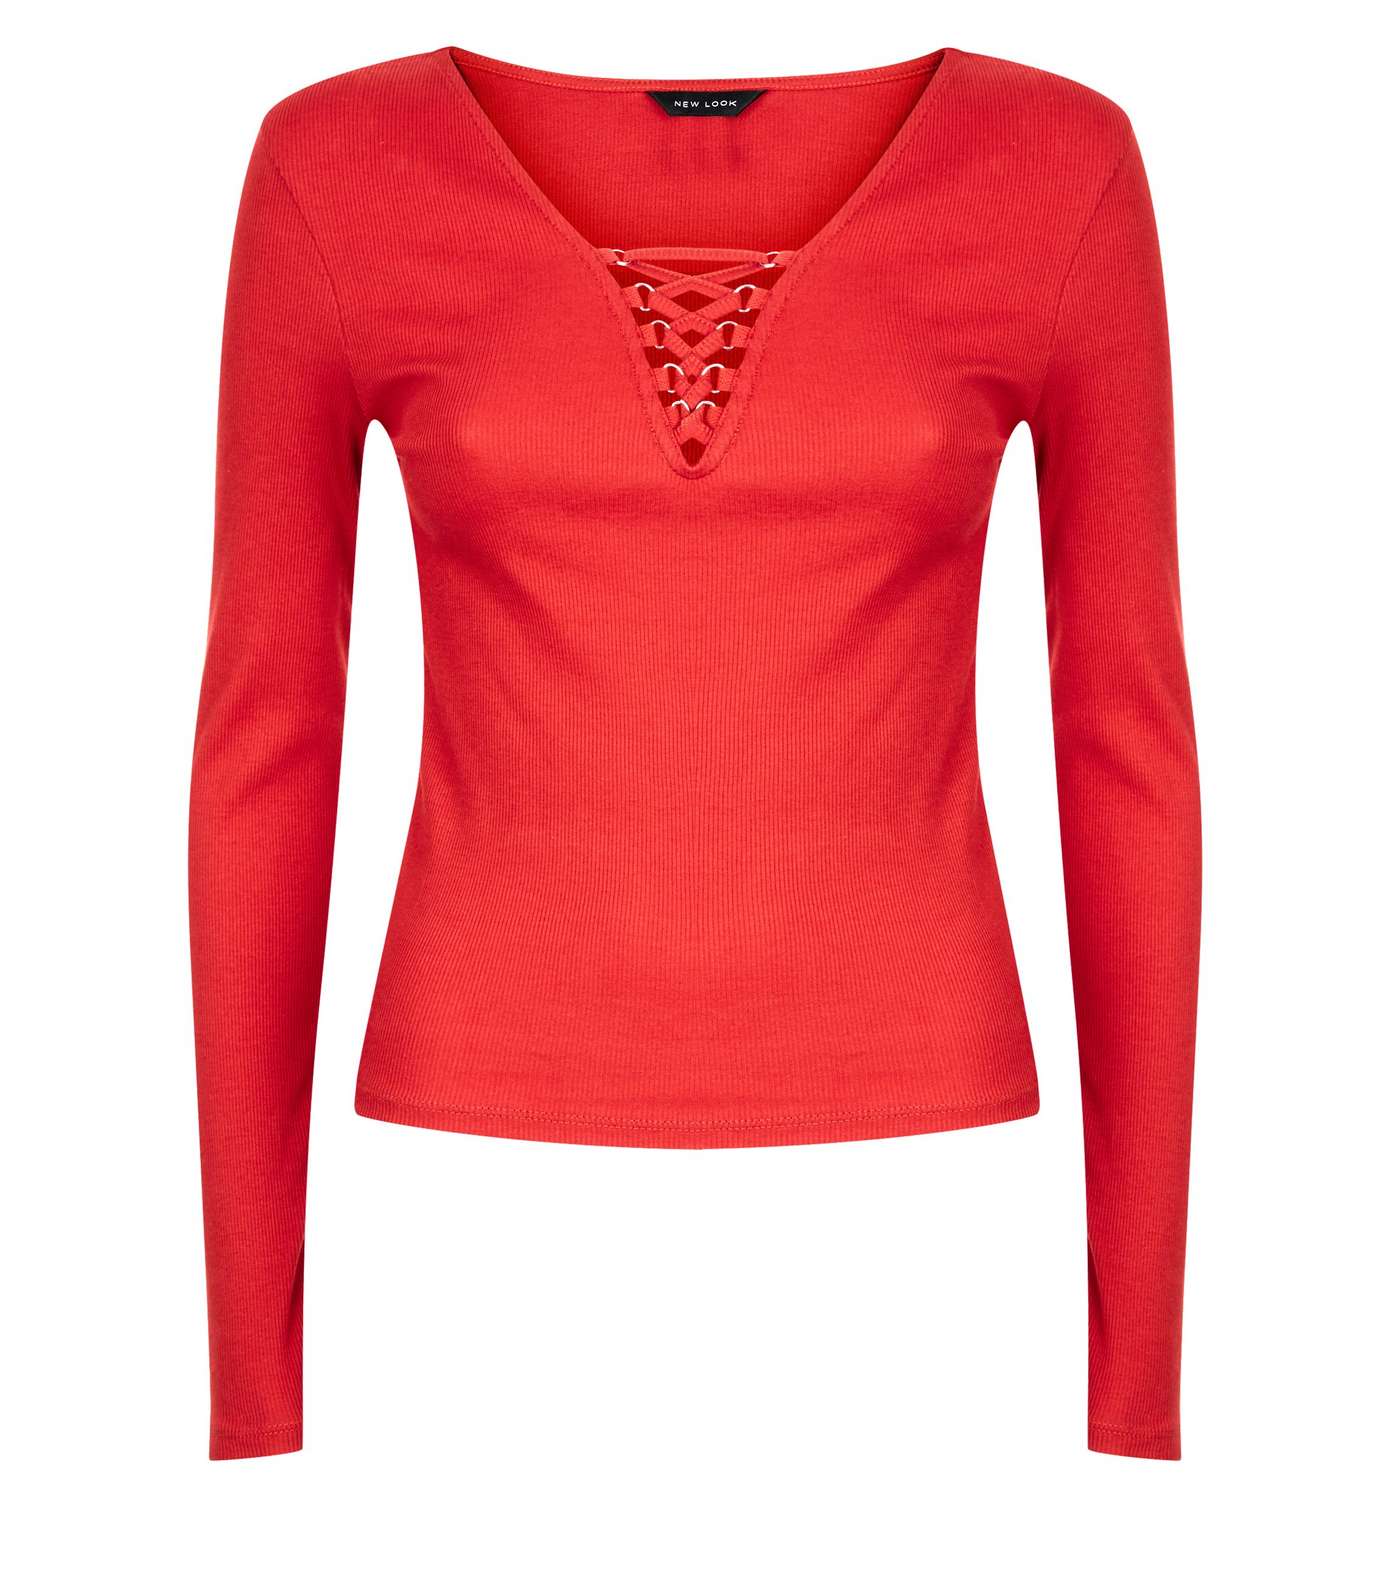 Red Lace-Up Neck Long Sleeve Top Image 4